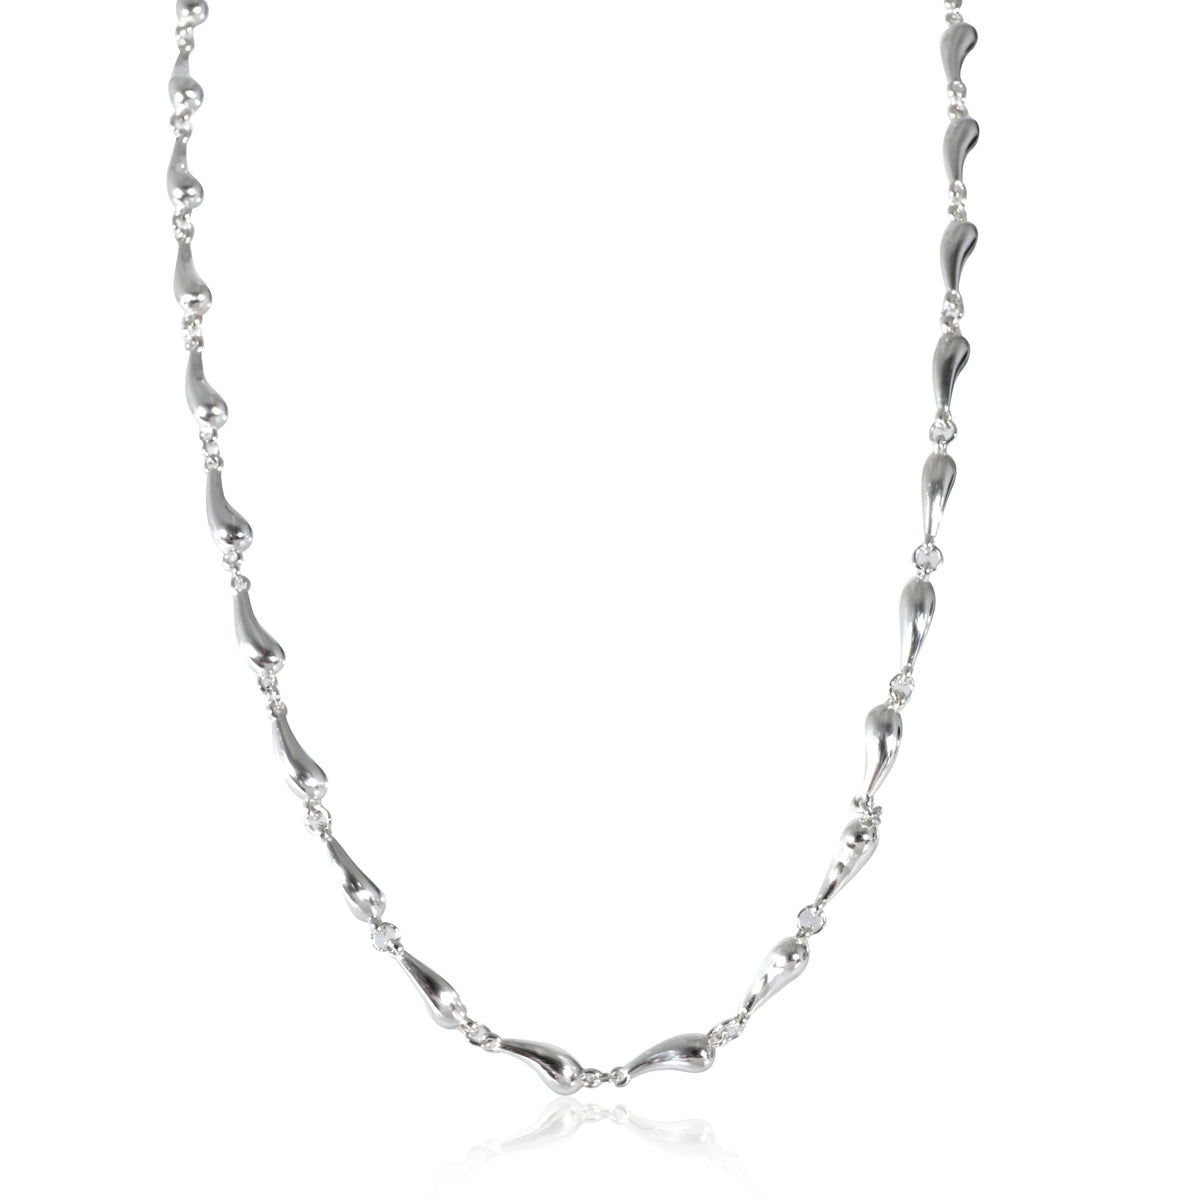 Tiffany & Co. Elsa Peretti Continuous Teardrop Necklace in Sterling Silver